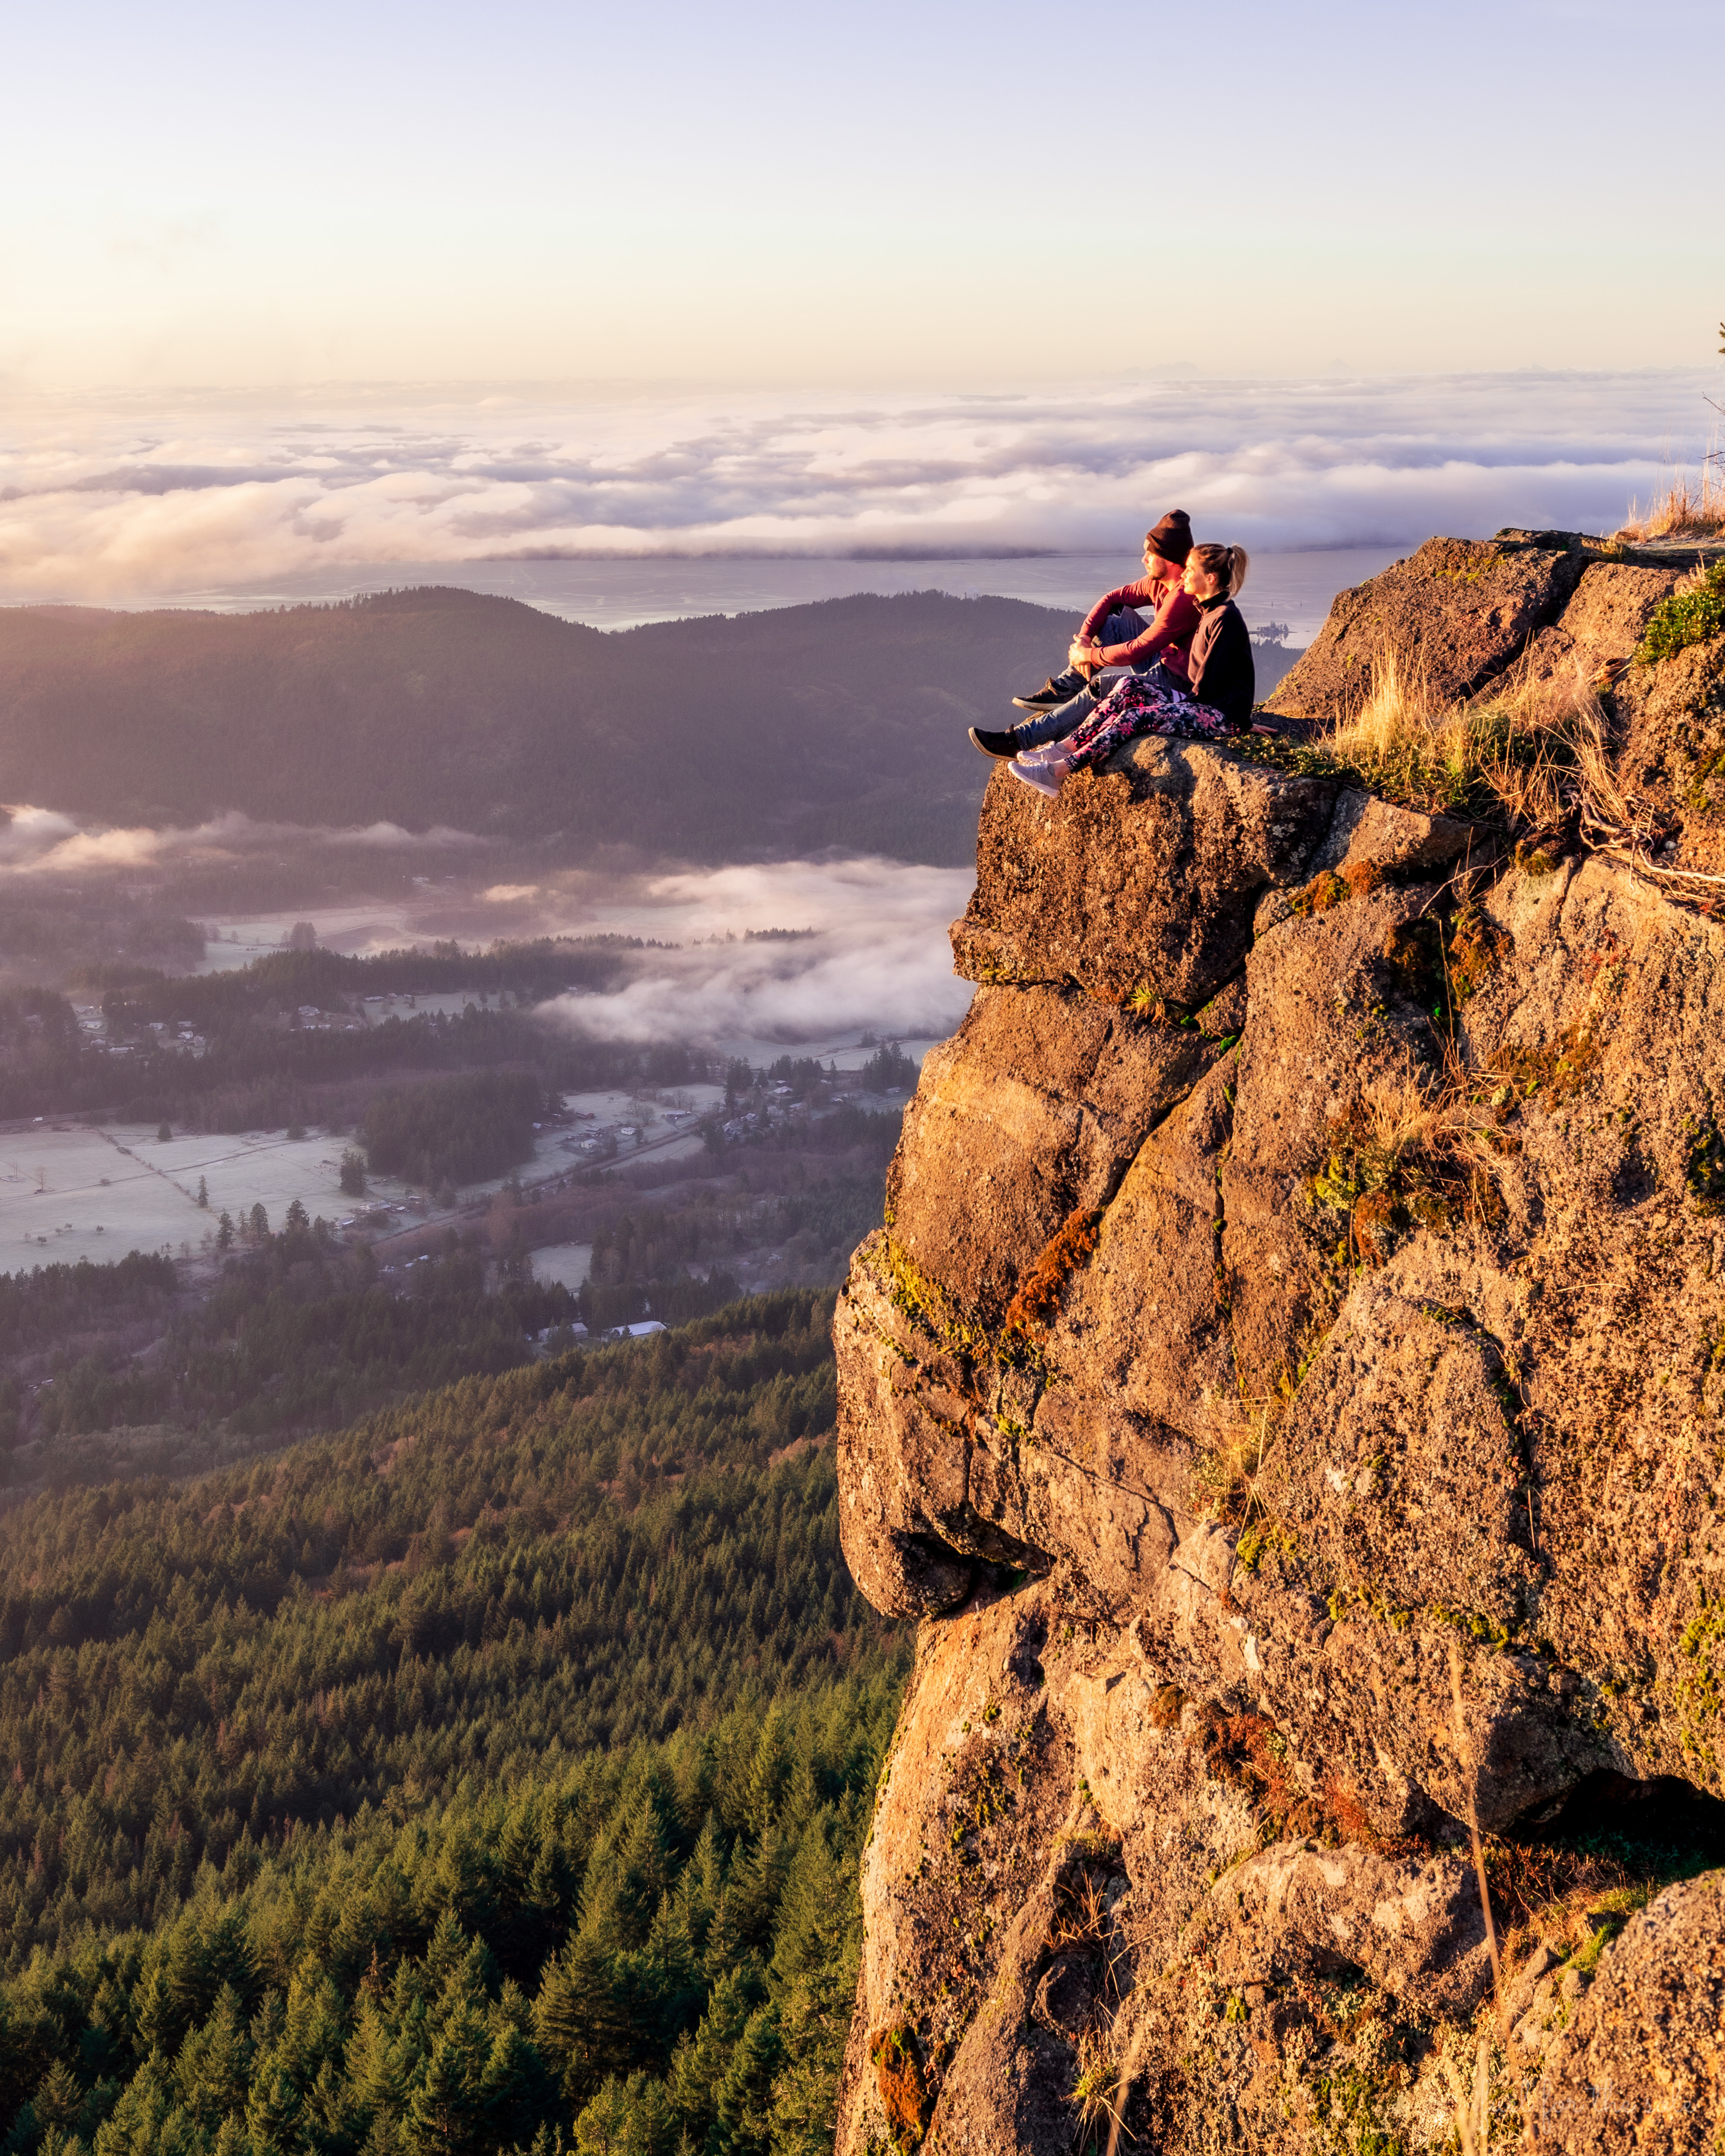 The best view in Cowichan Valley - Mount Prevost